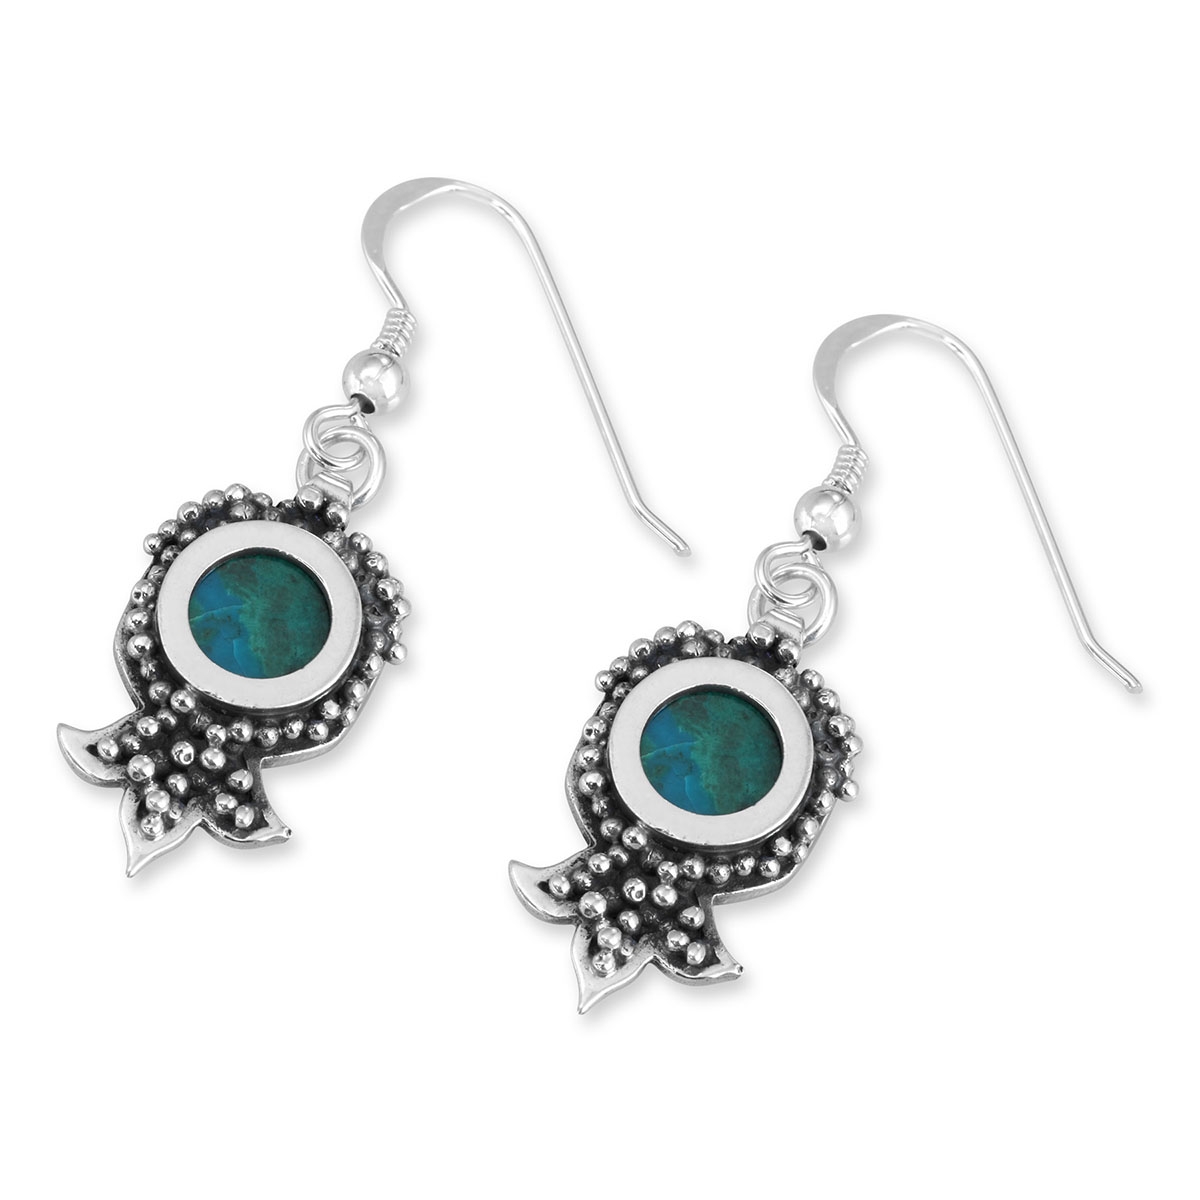 Rafael Jewelry Eilat Stone and Sterling Silver Pomegranate Earrings - 2